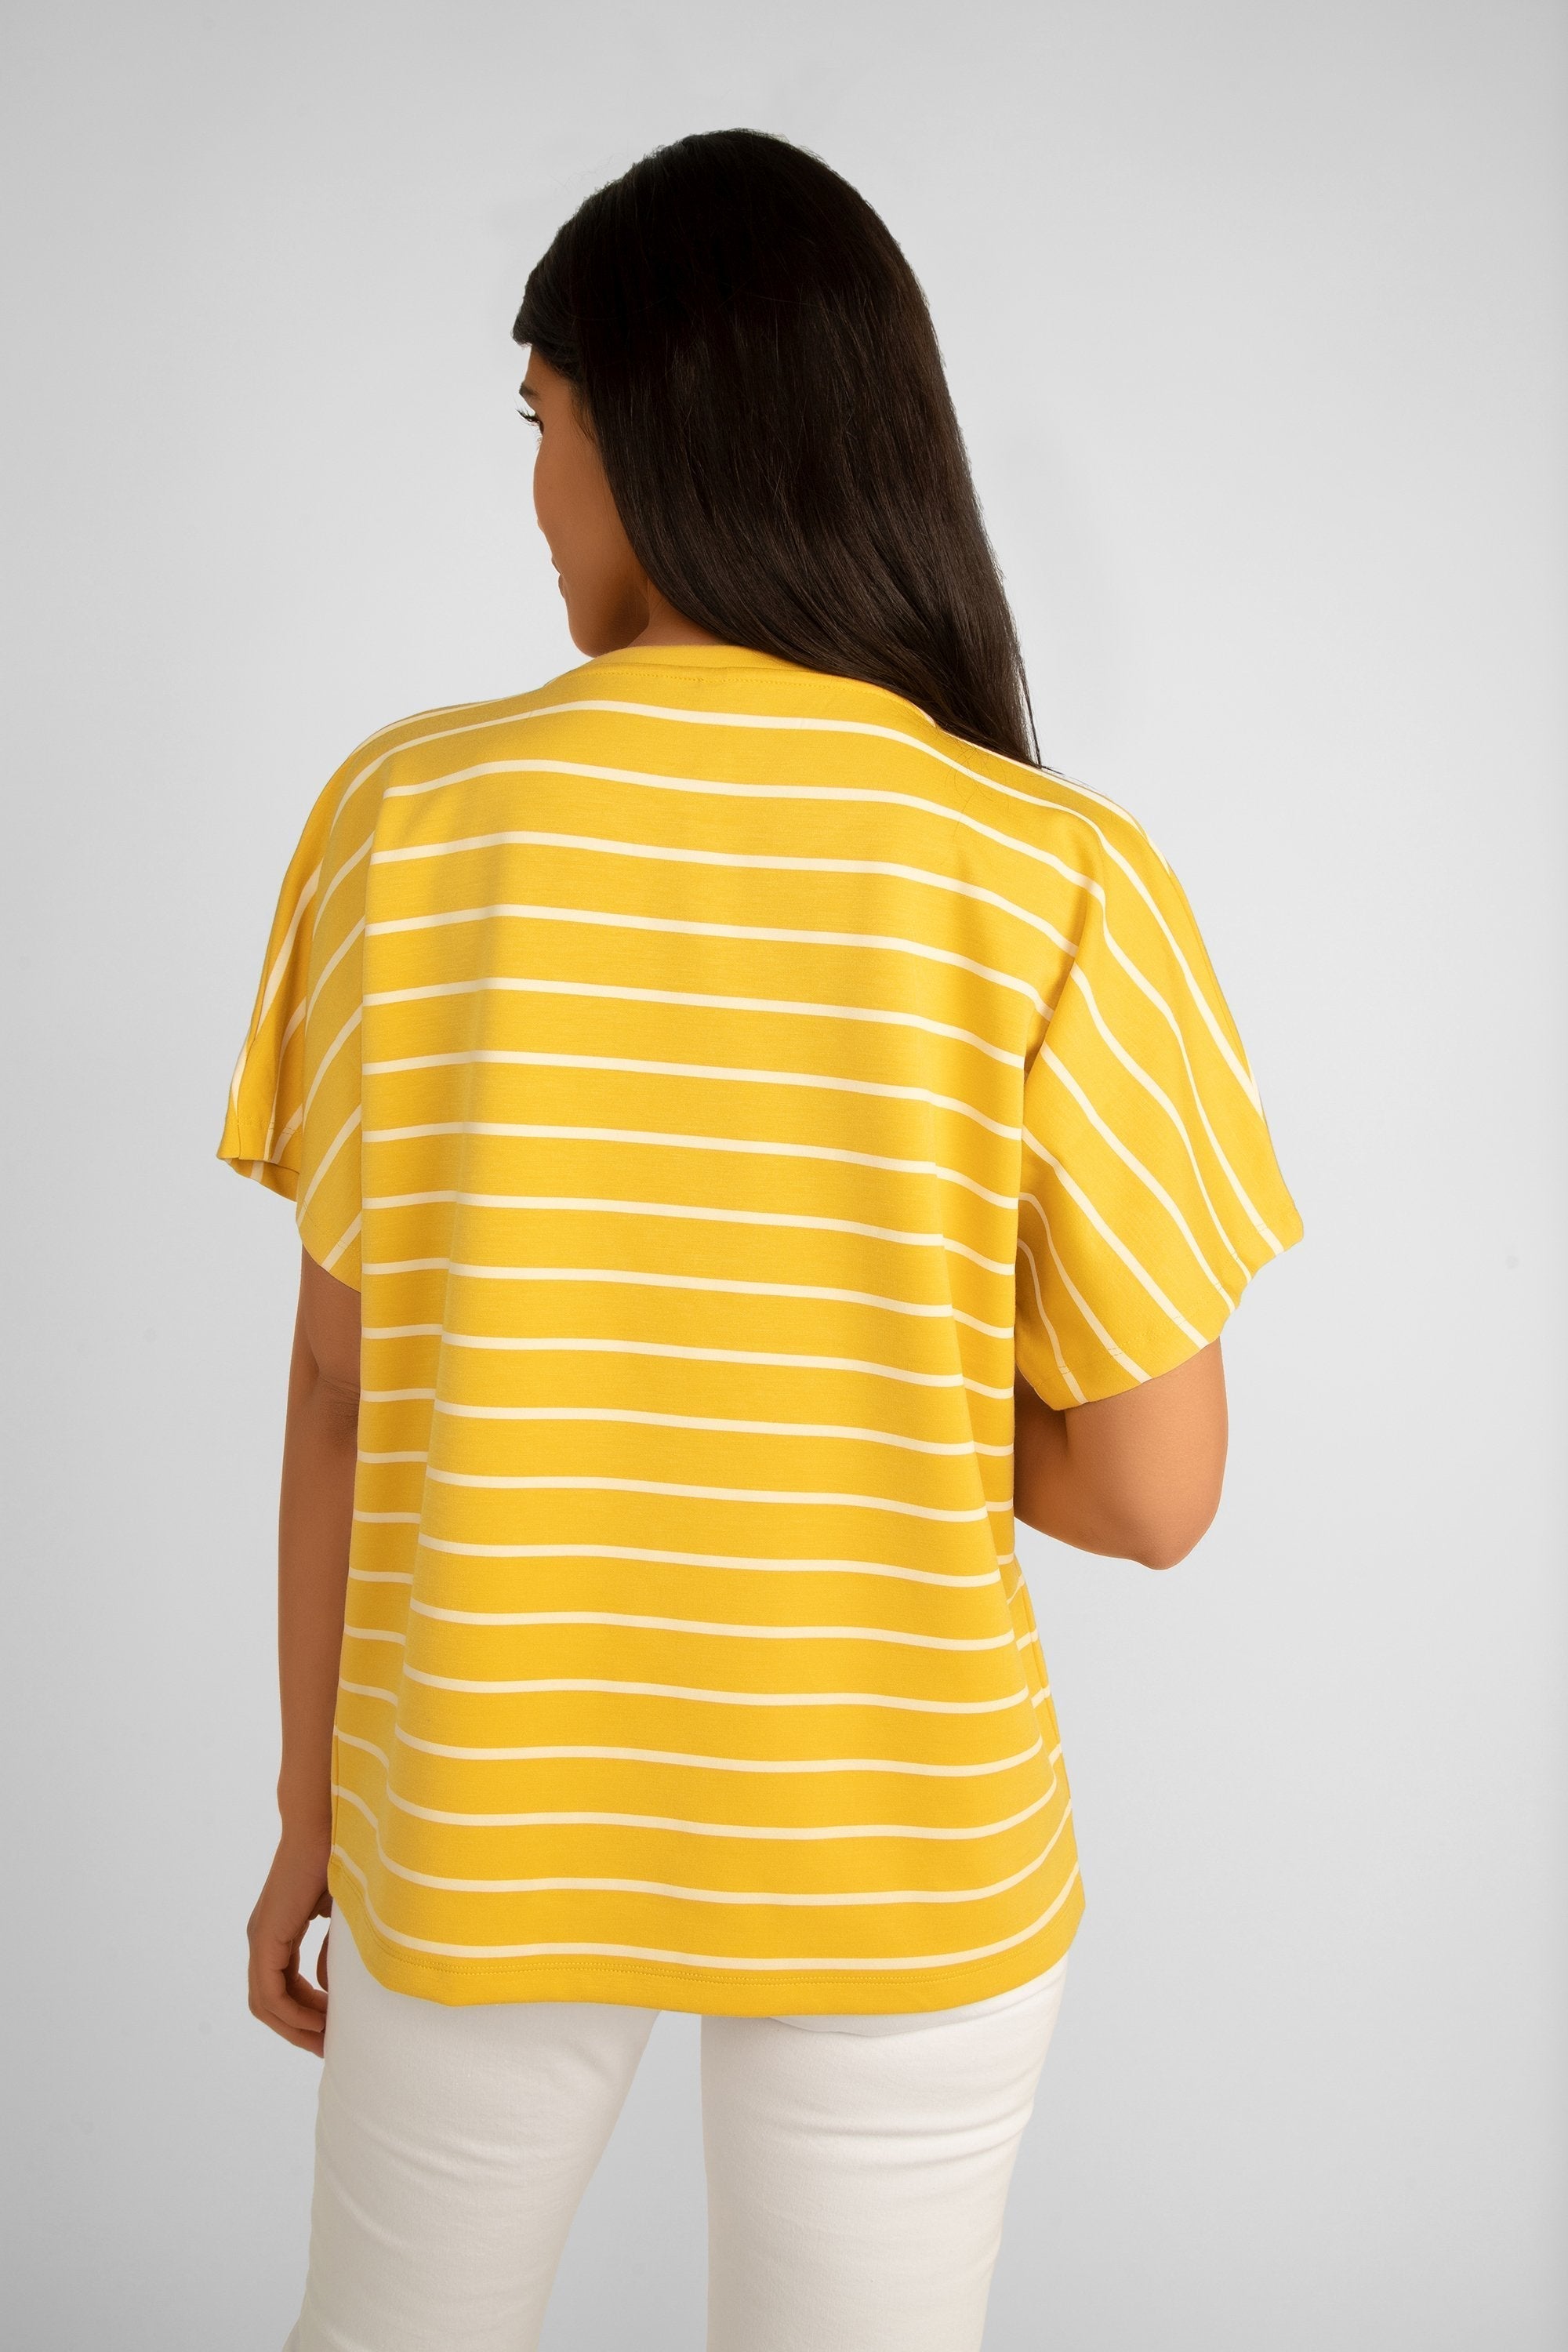 Back view of Soya Concept (26540) Women's Short Raglan Sleeve Stripes T-Shirt in Yellow with White Stripes